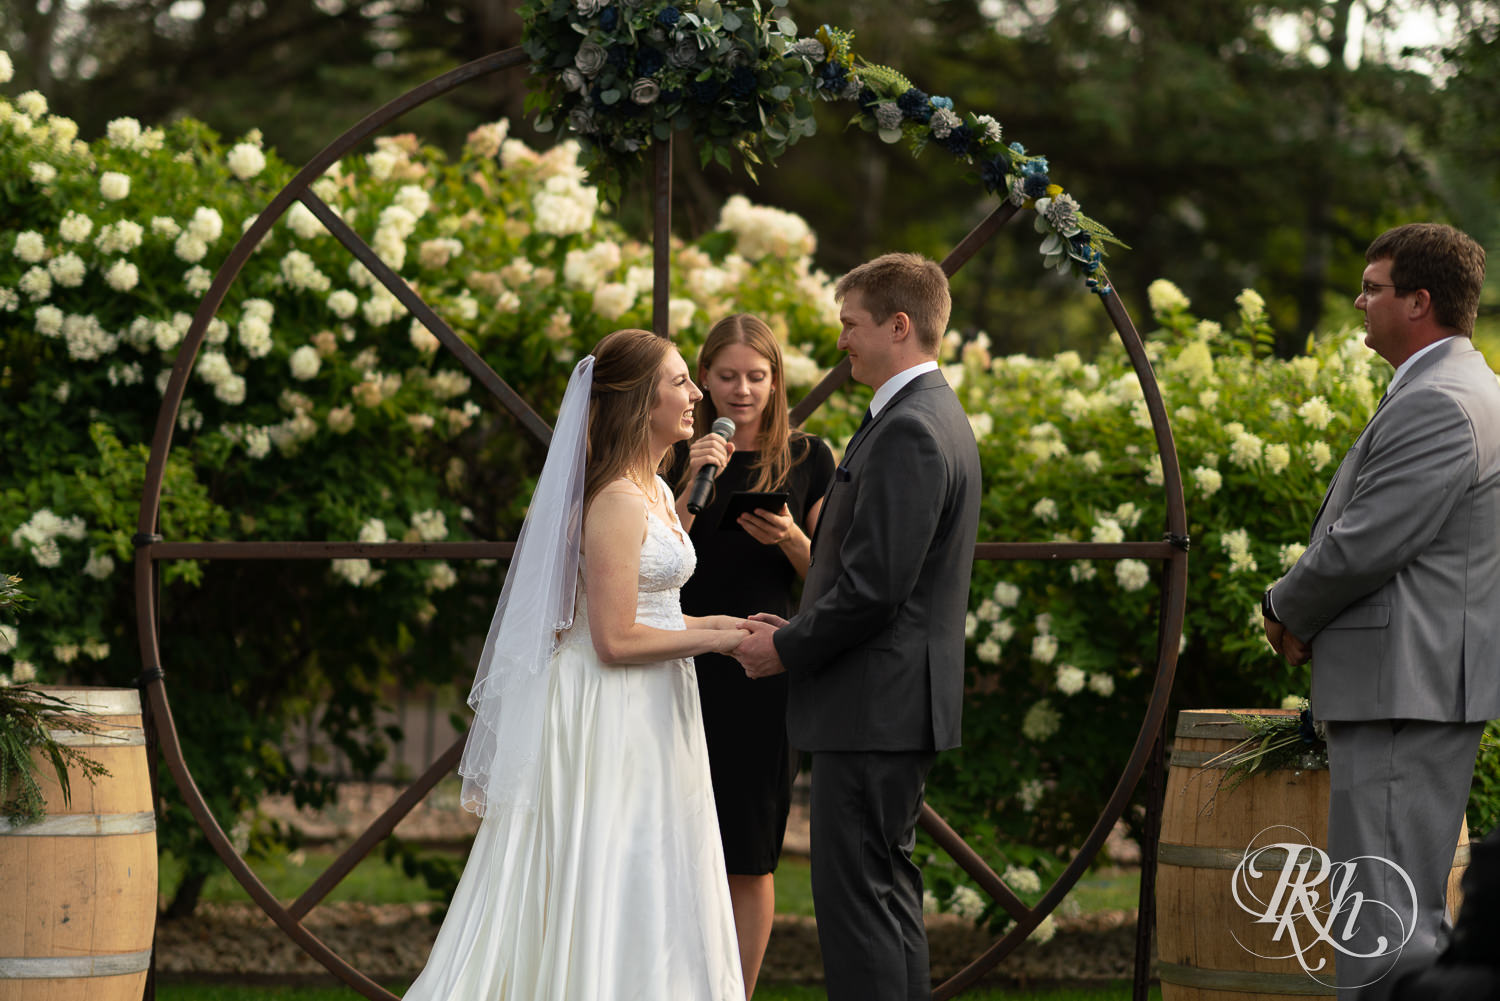 Outdoor wedding ceremony at Stone Lion Winery and Events in Isanti, Minnesota. 